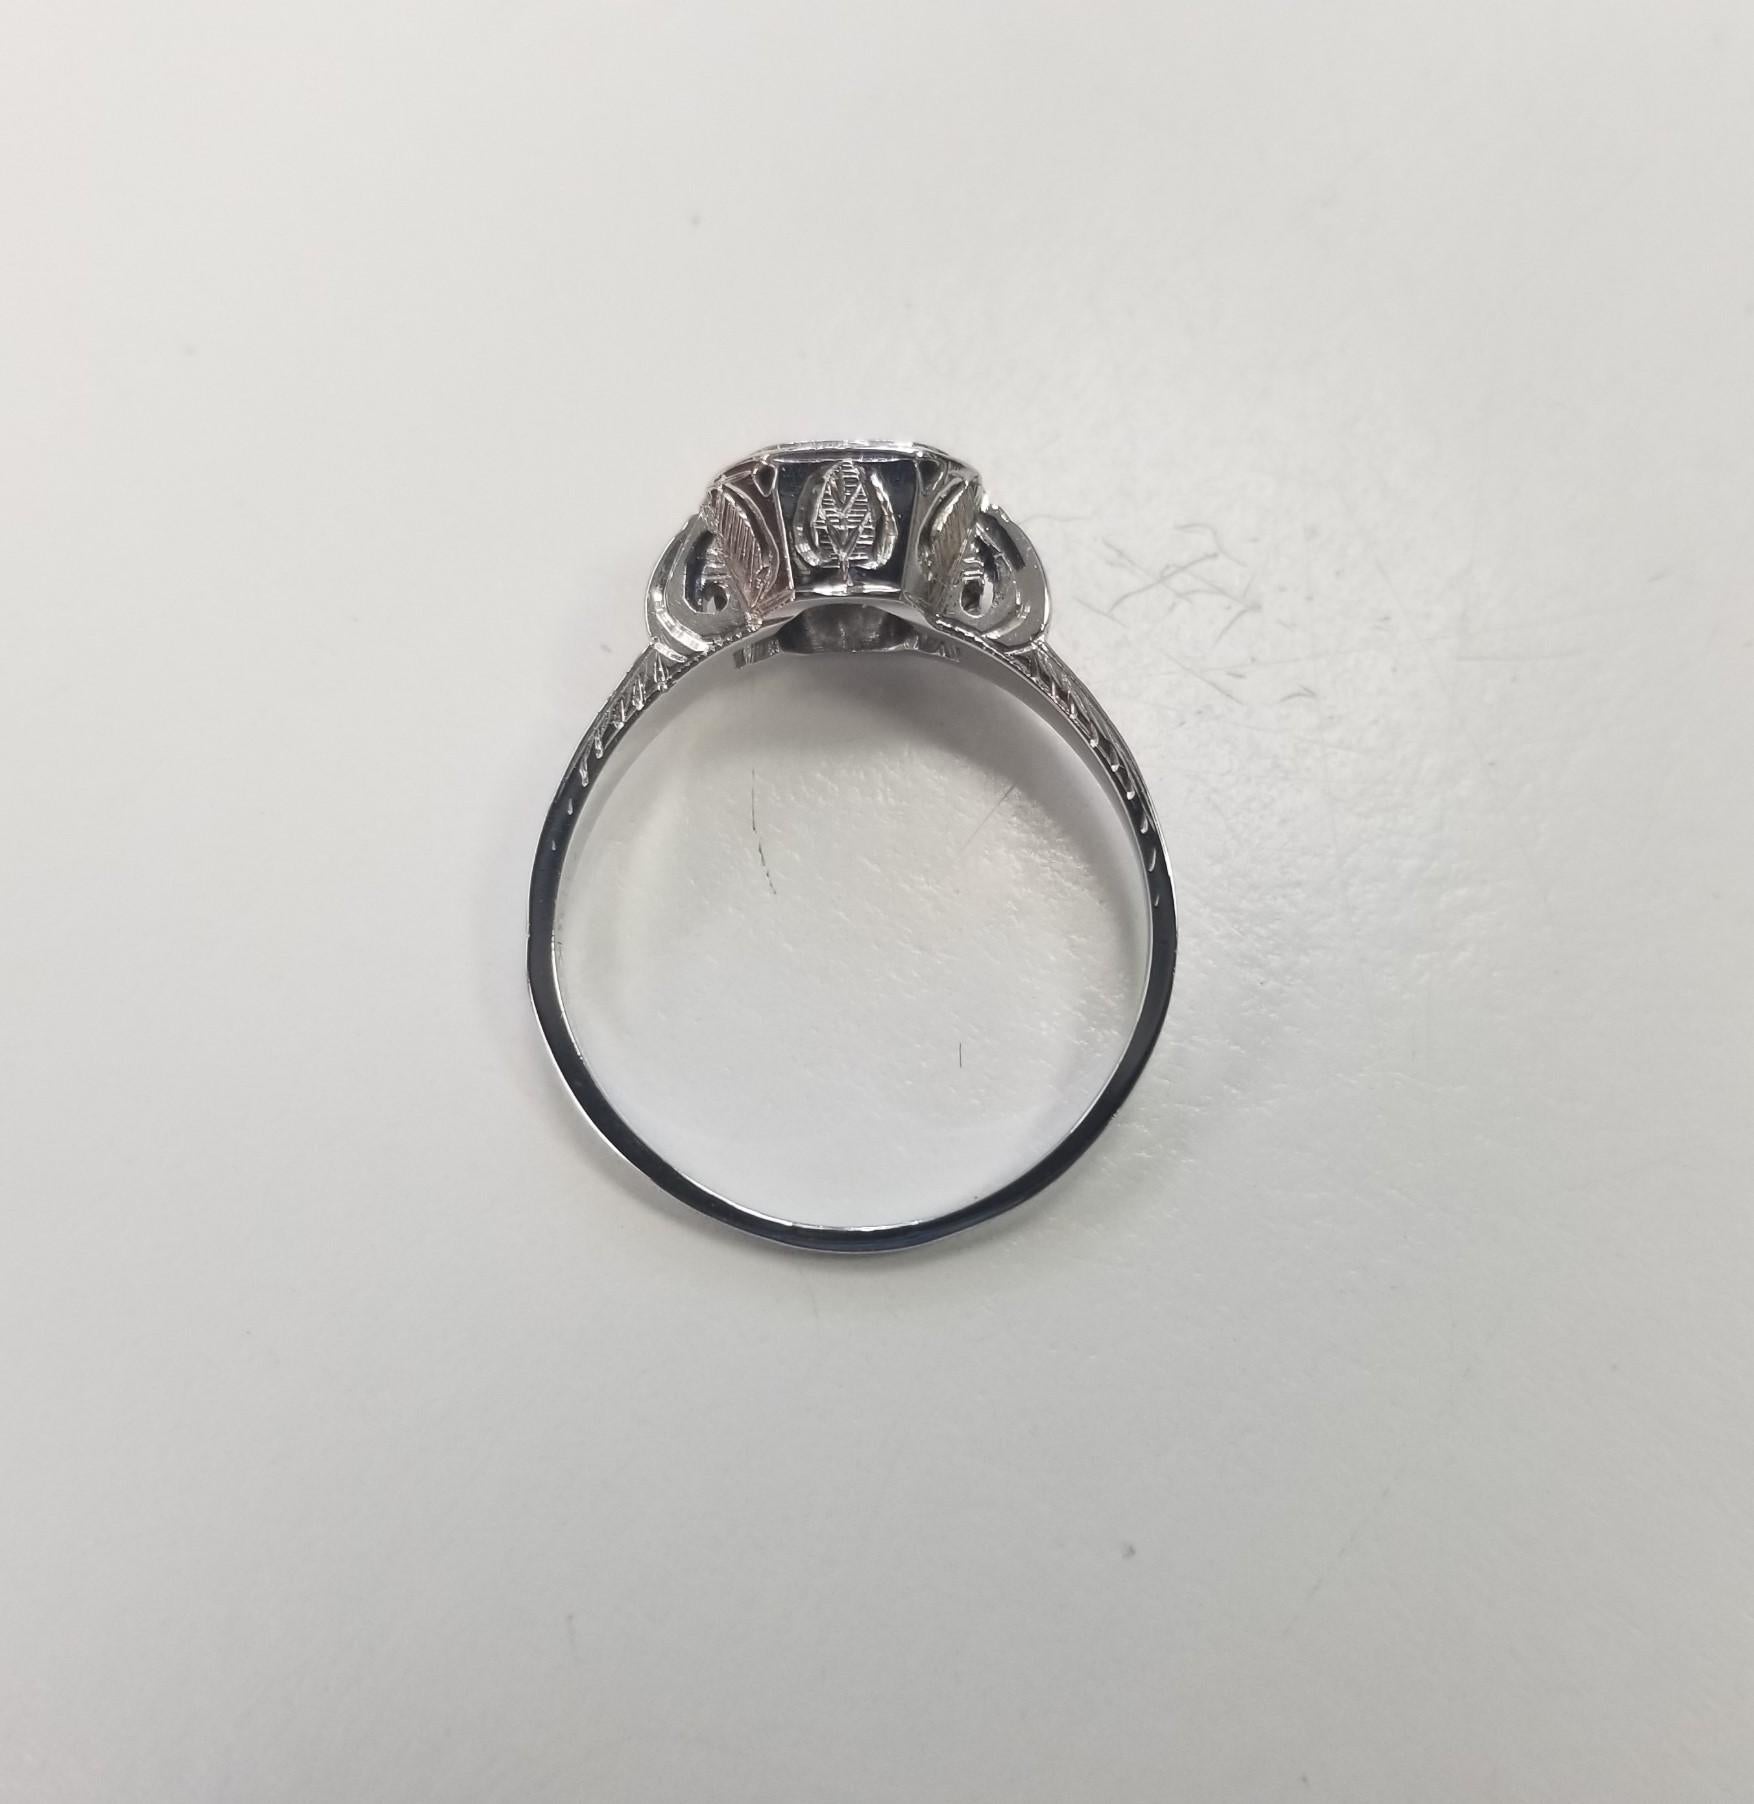 Women's Art Deco 14k White Gold Hand Engraved Diamond Ring with Old European Cut Diamond For Sale